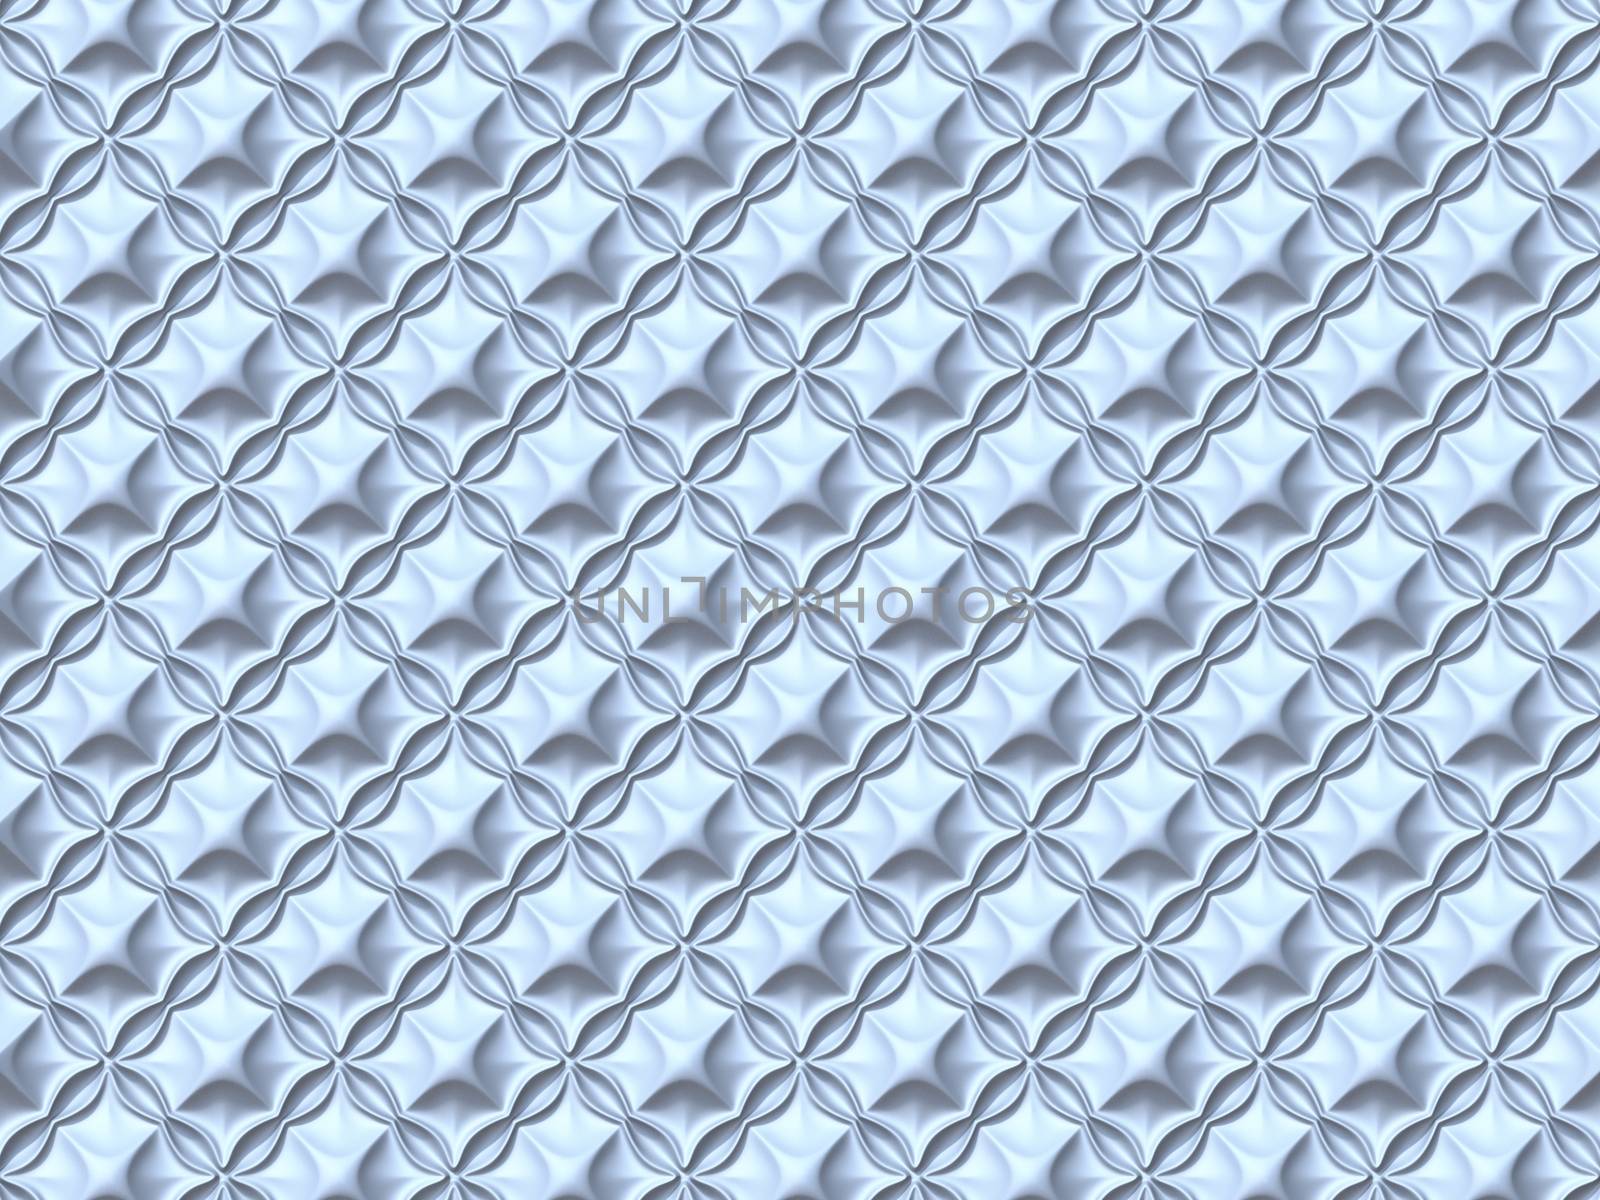 Abstract wavy square white background 3D render illustration